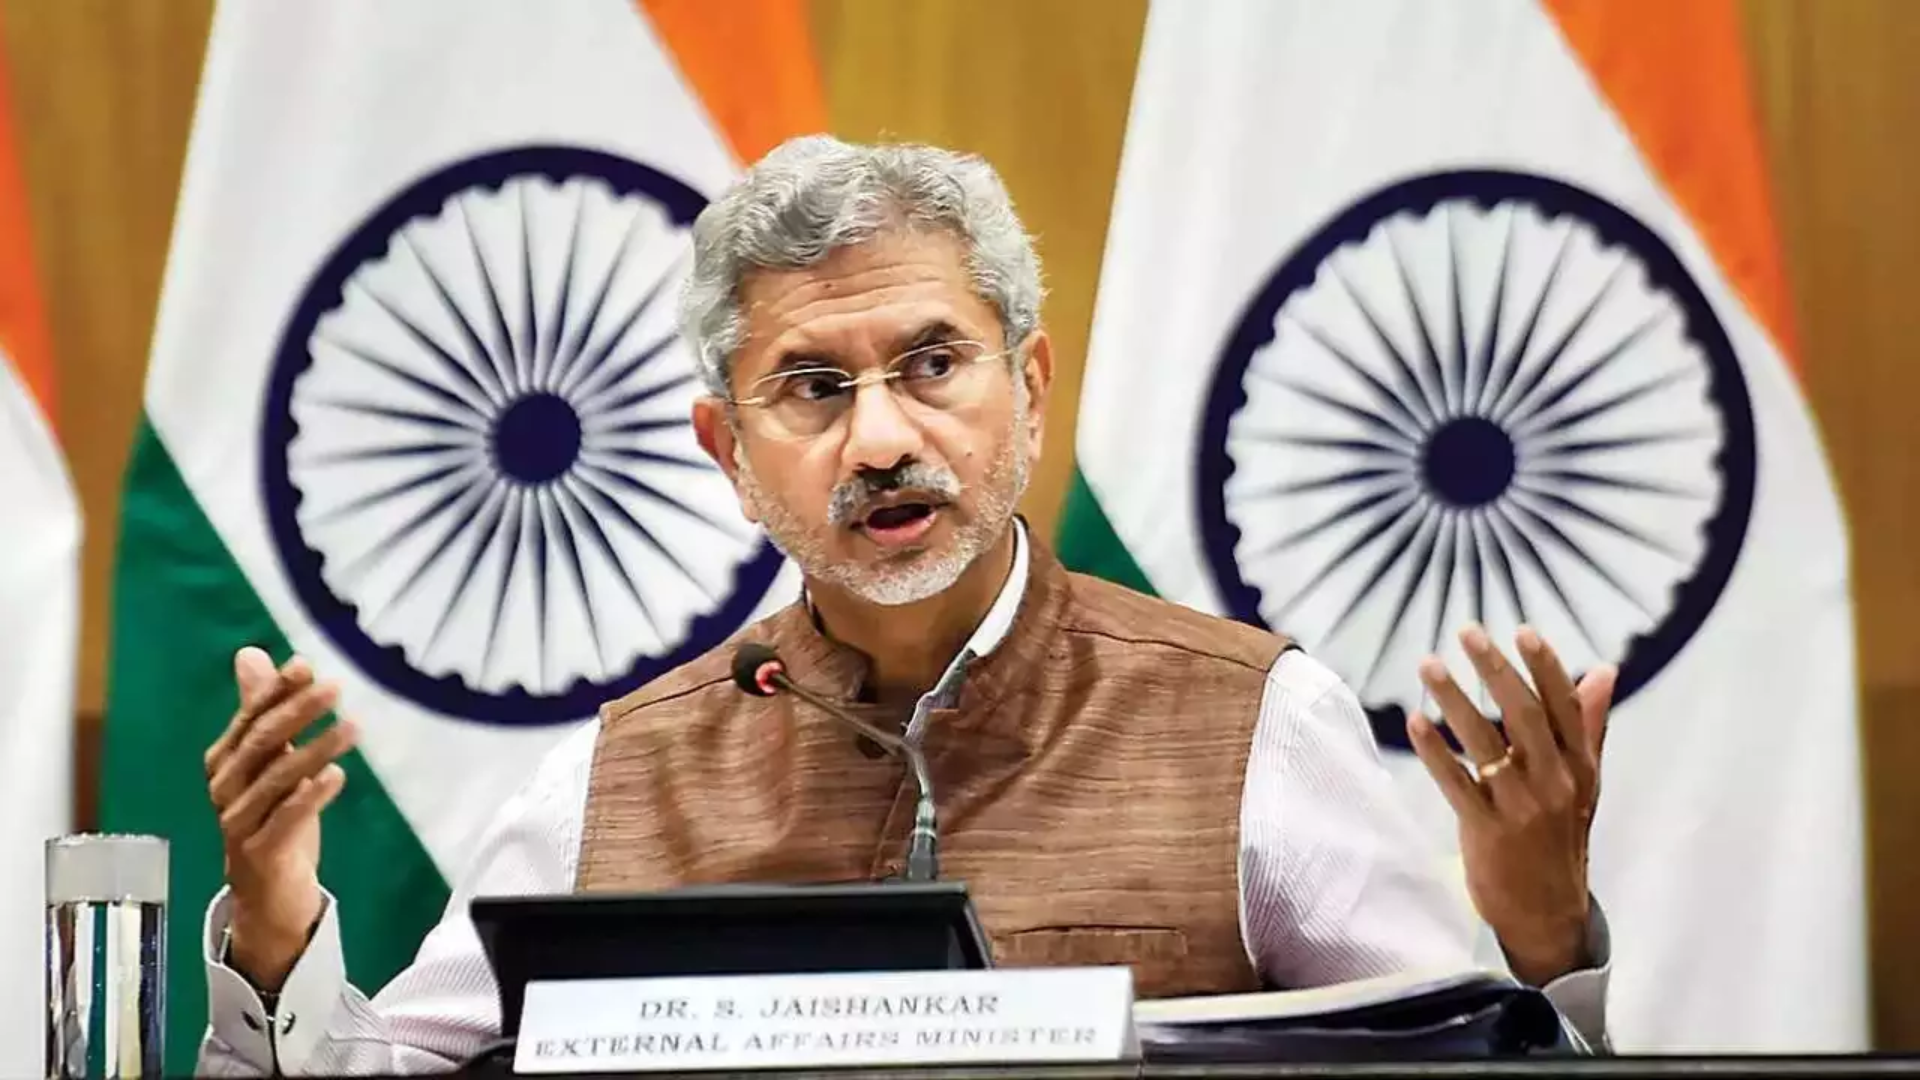 S Jaishankar Asserts India’s Firm Stand on Border Issues Amidst Tensions with China